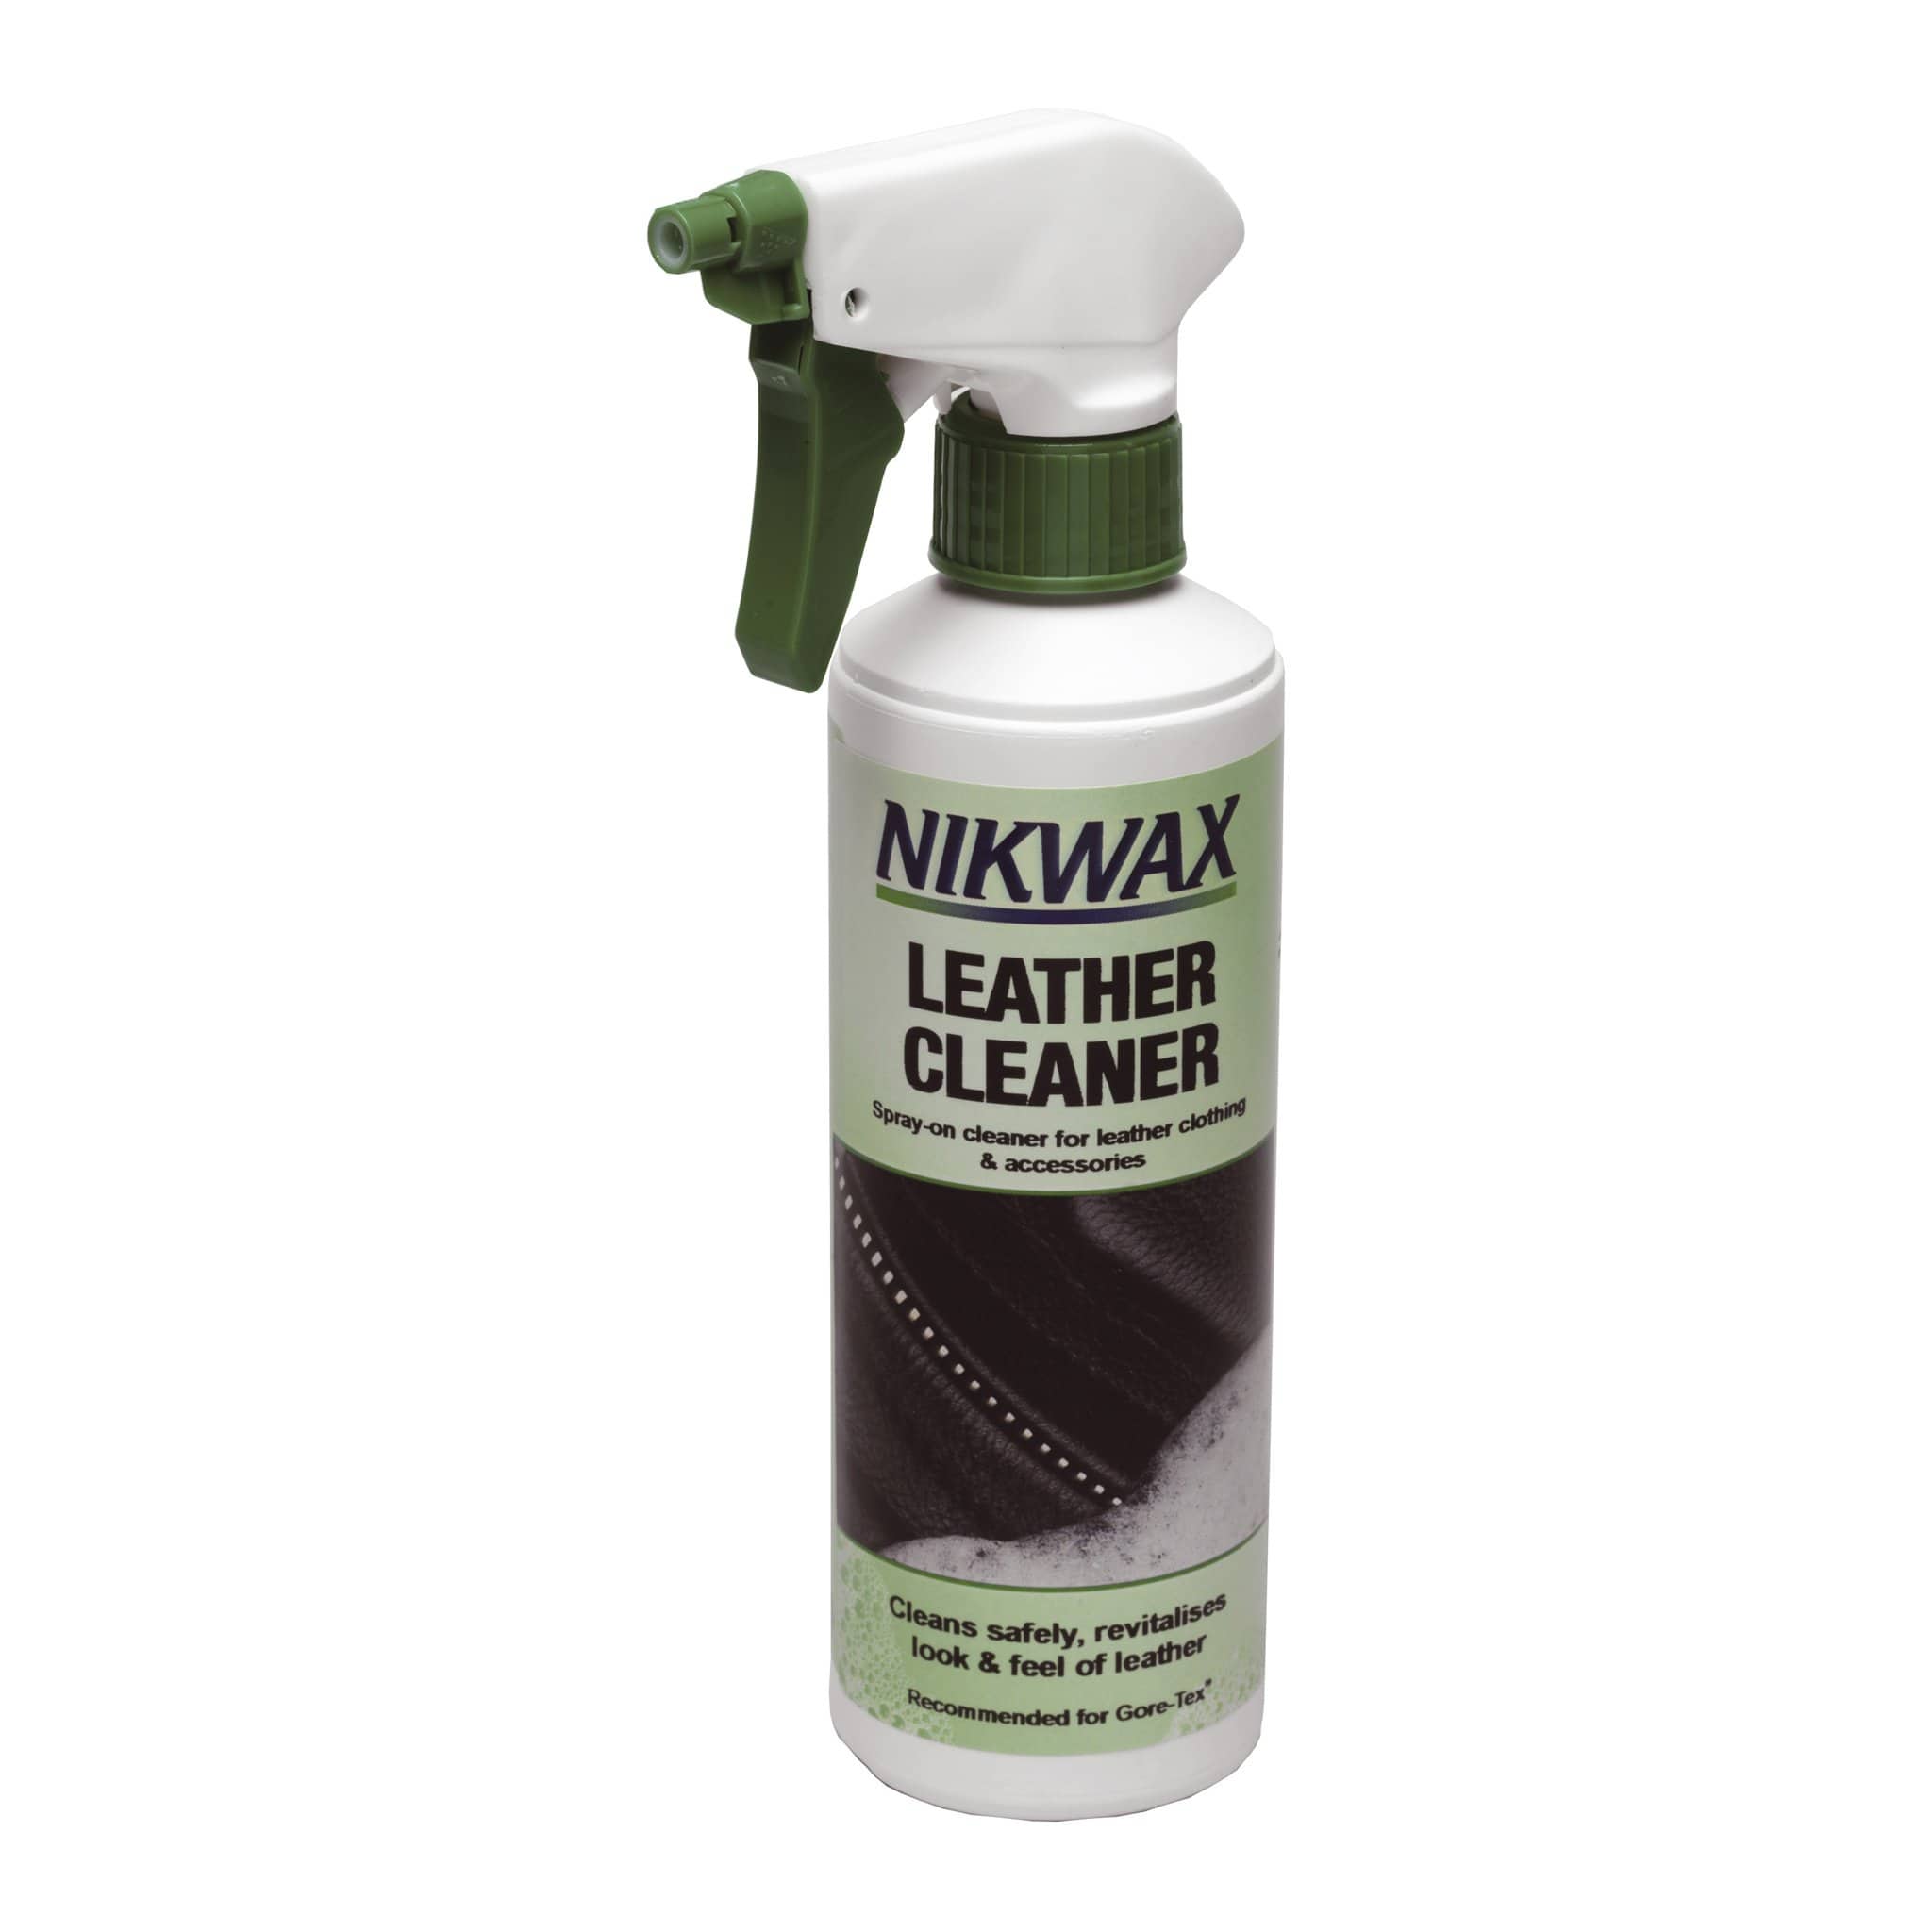 Nikwax Leather Cleaner 7714